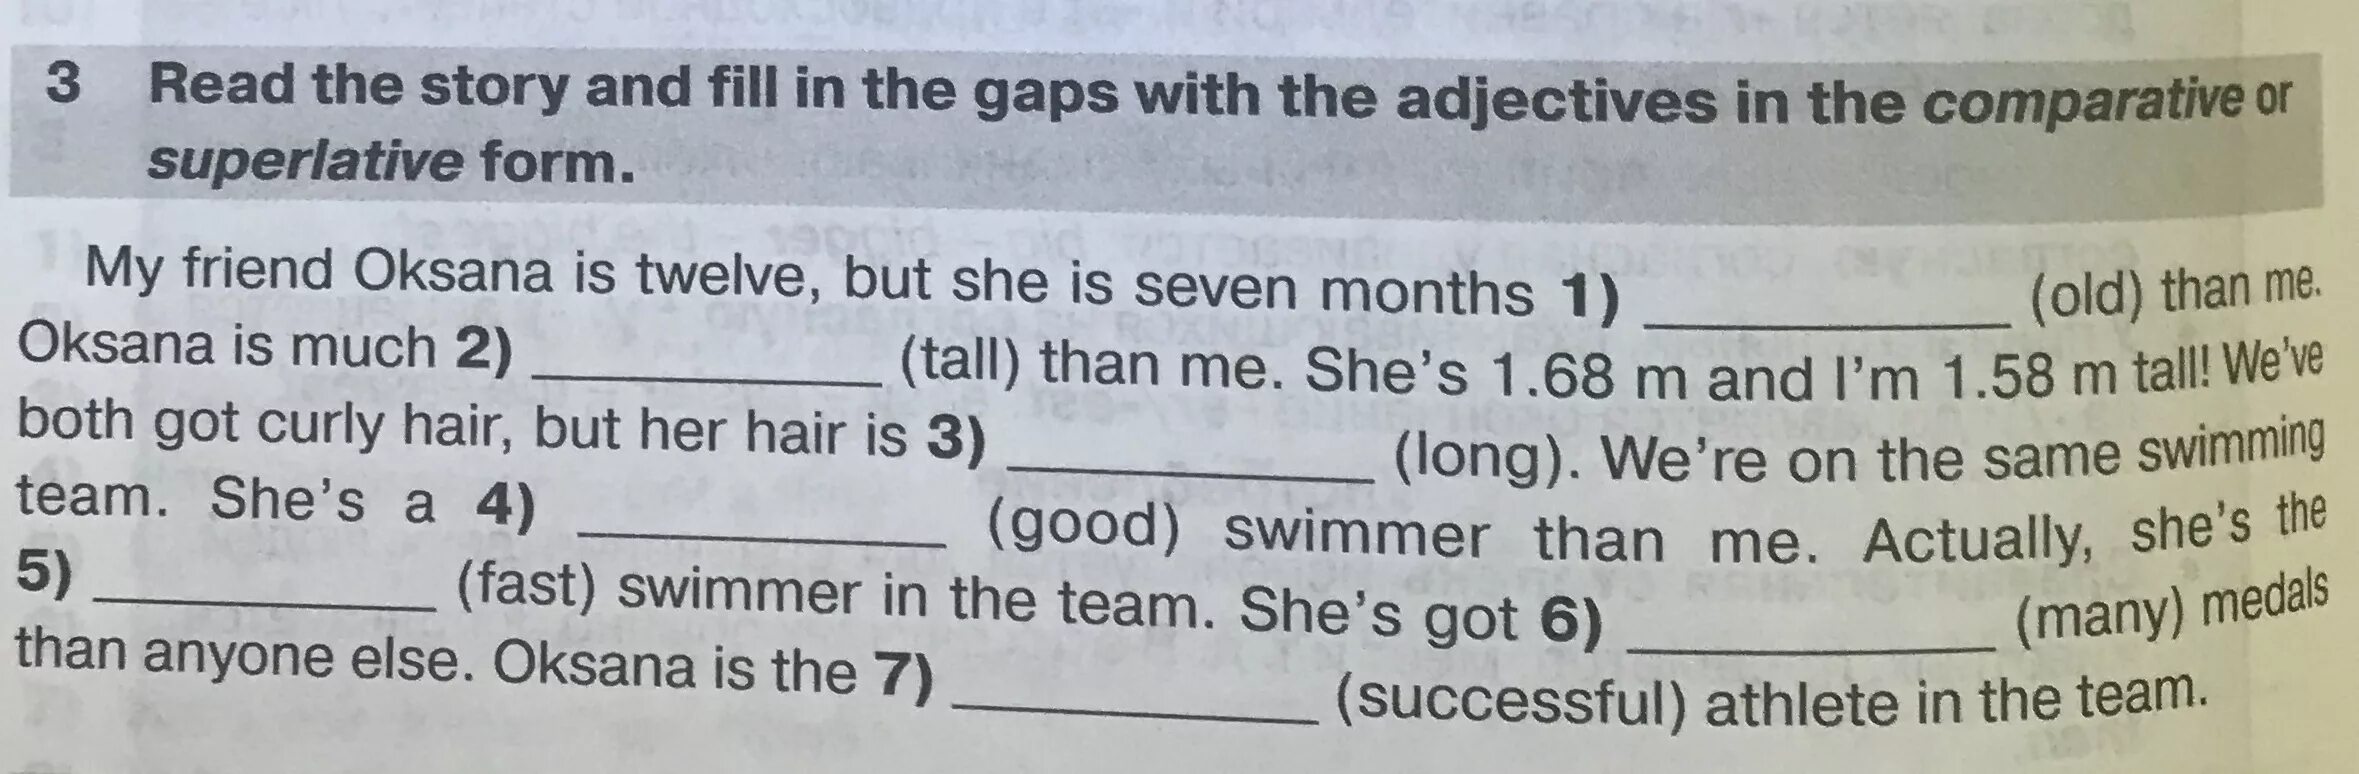 Complete the gaps with the right comparative. Read the story and fill in the gaps with the adjectives in the Comparative or Superlative form. Read the story and fill in the gaps with the adjectives in the Comparative or Superlative form my friend Oksana. Fill in the gaps with the Comparative or the Superlative form. Comparative adjectives fill in the gaps.